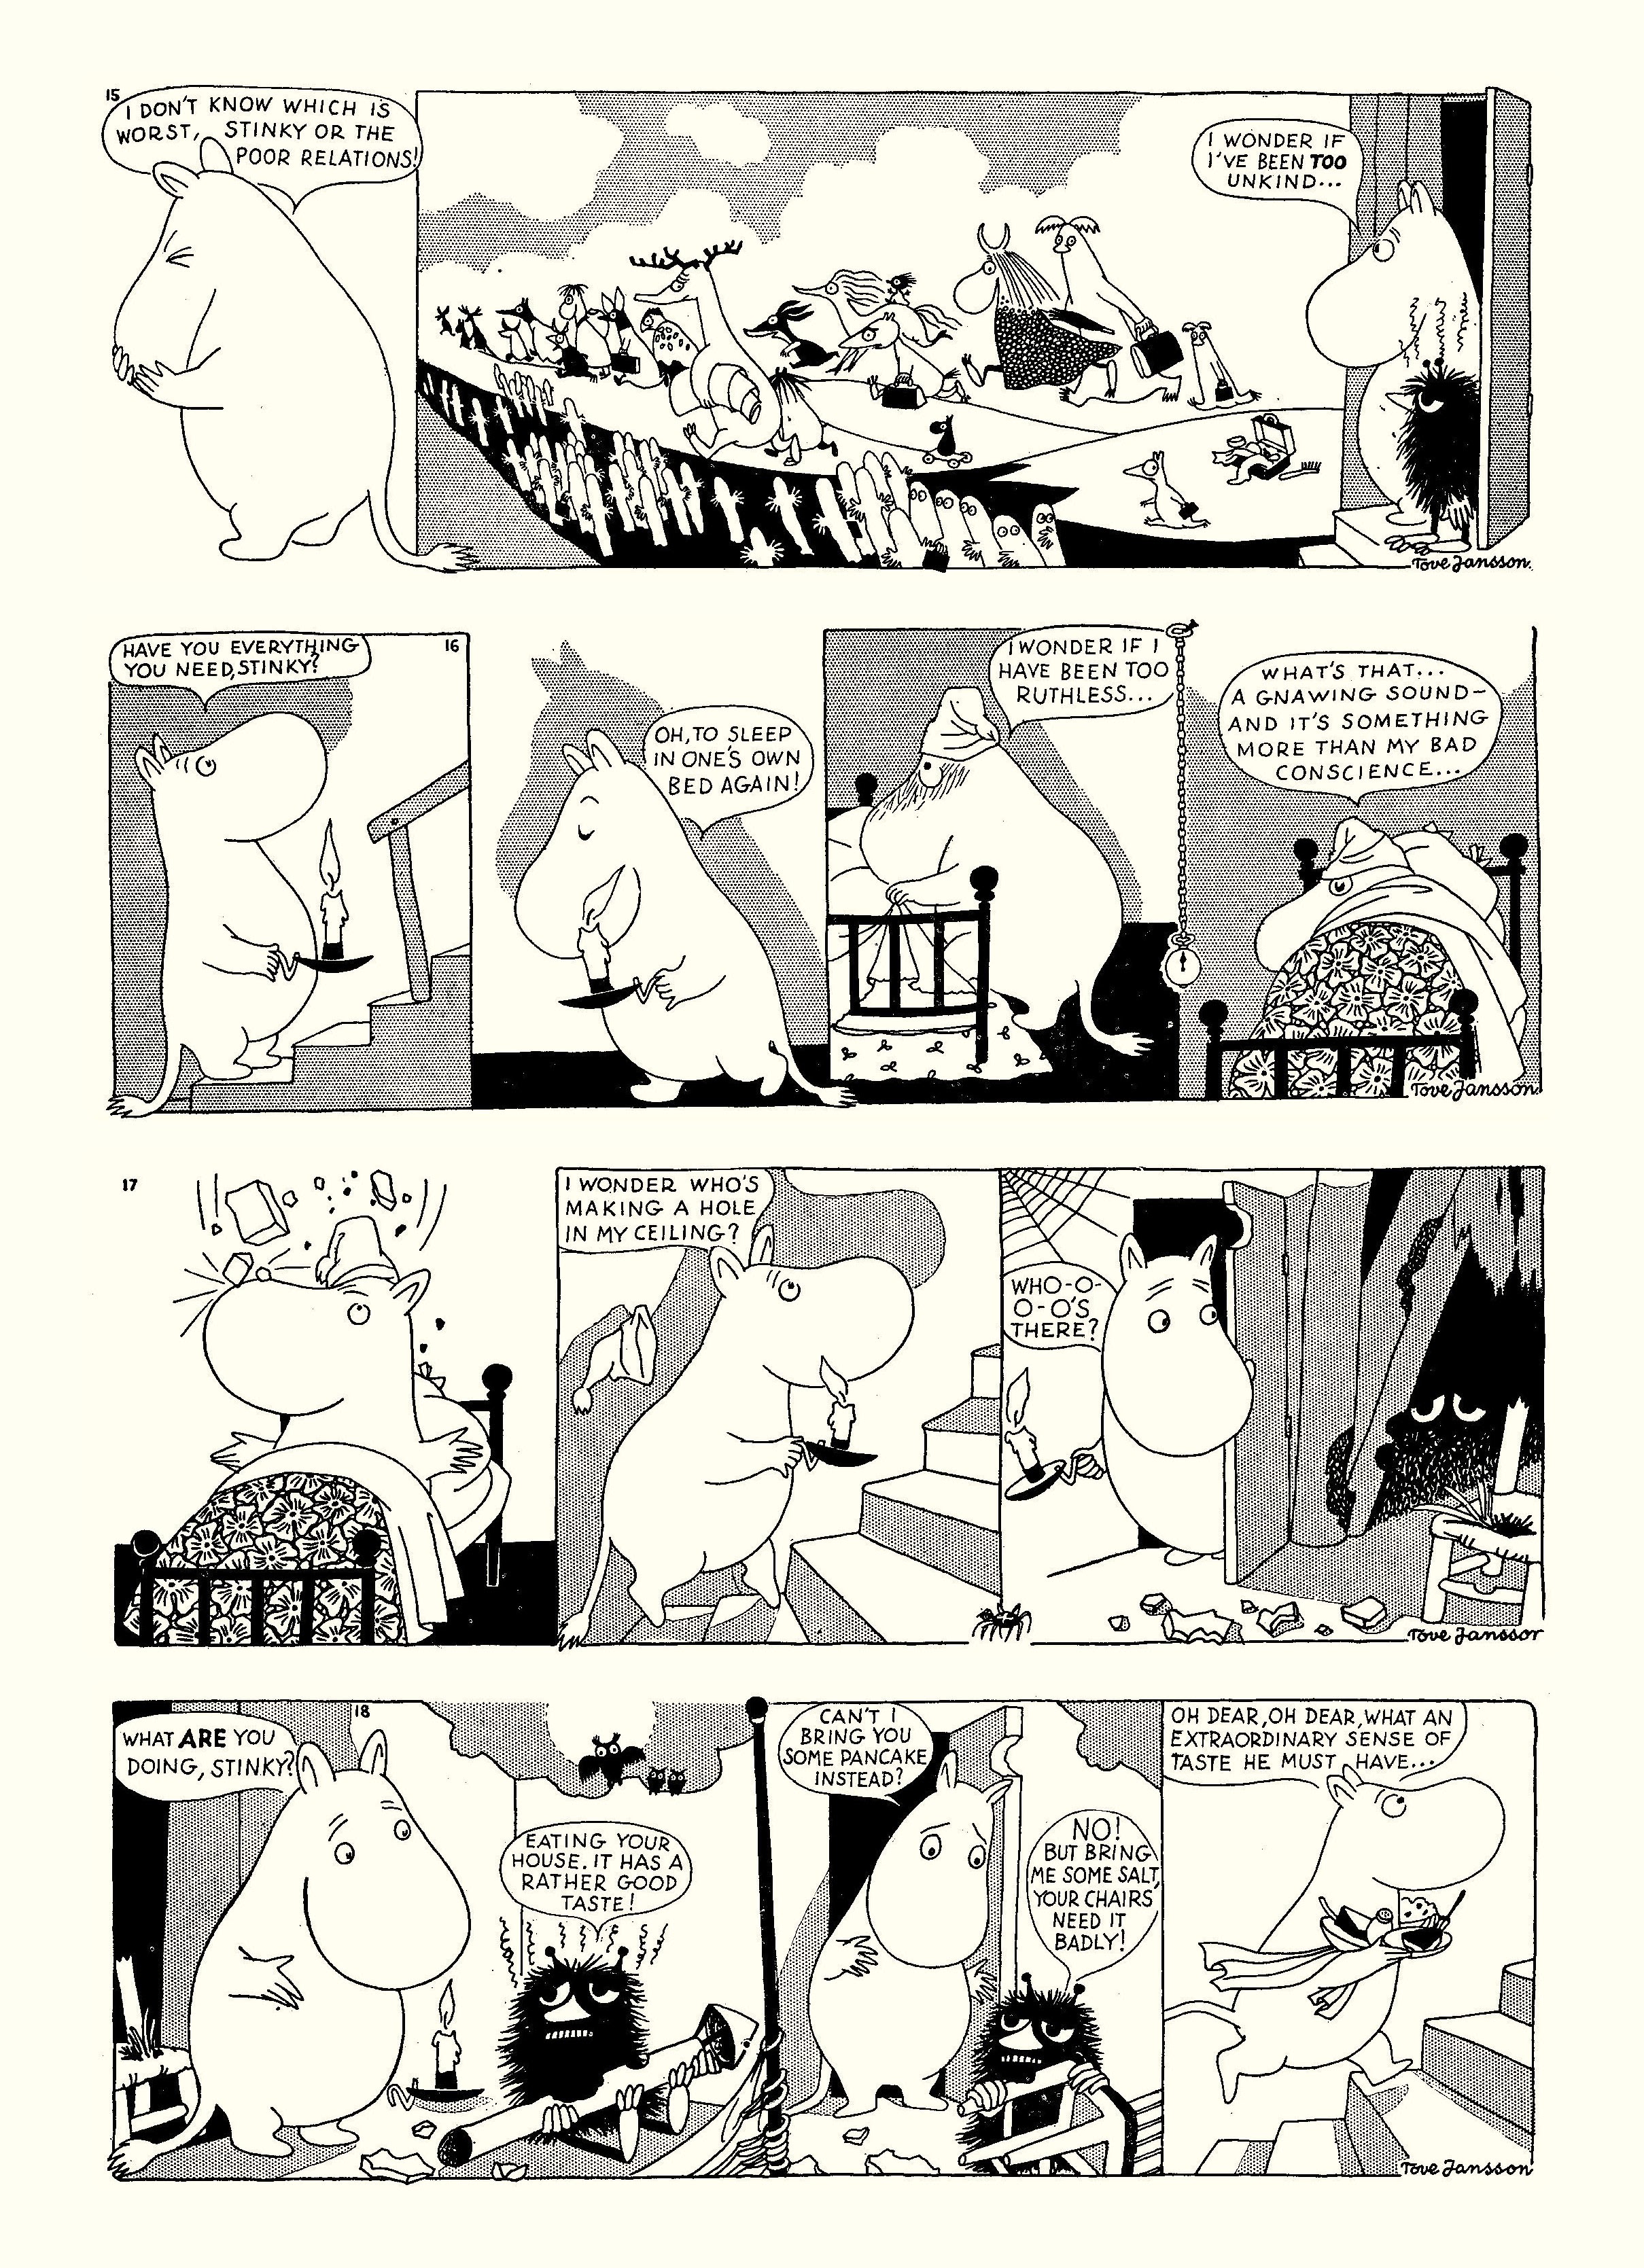 Read online Moomin: The Complete Tove Jansson Comic Strip comic -  Issue # TPB 1 - 10